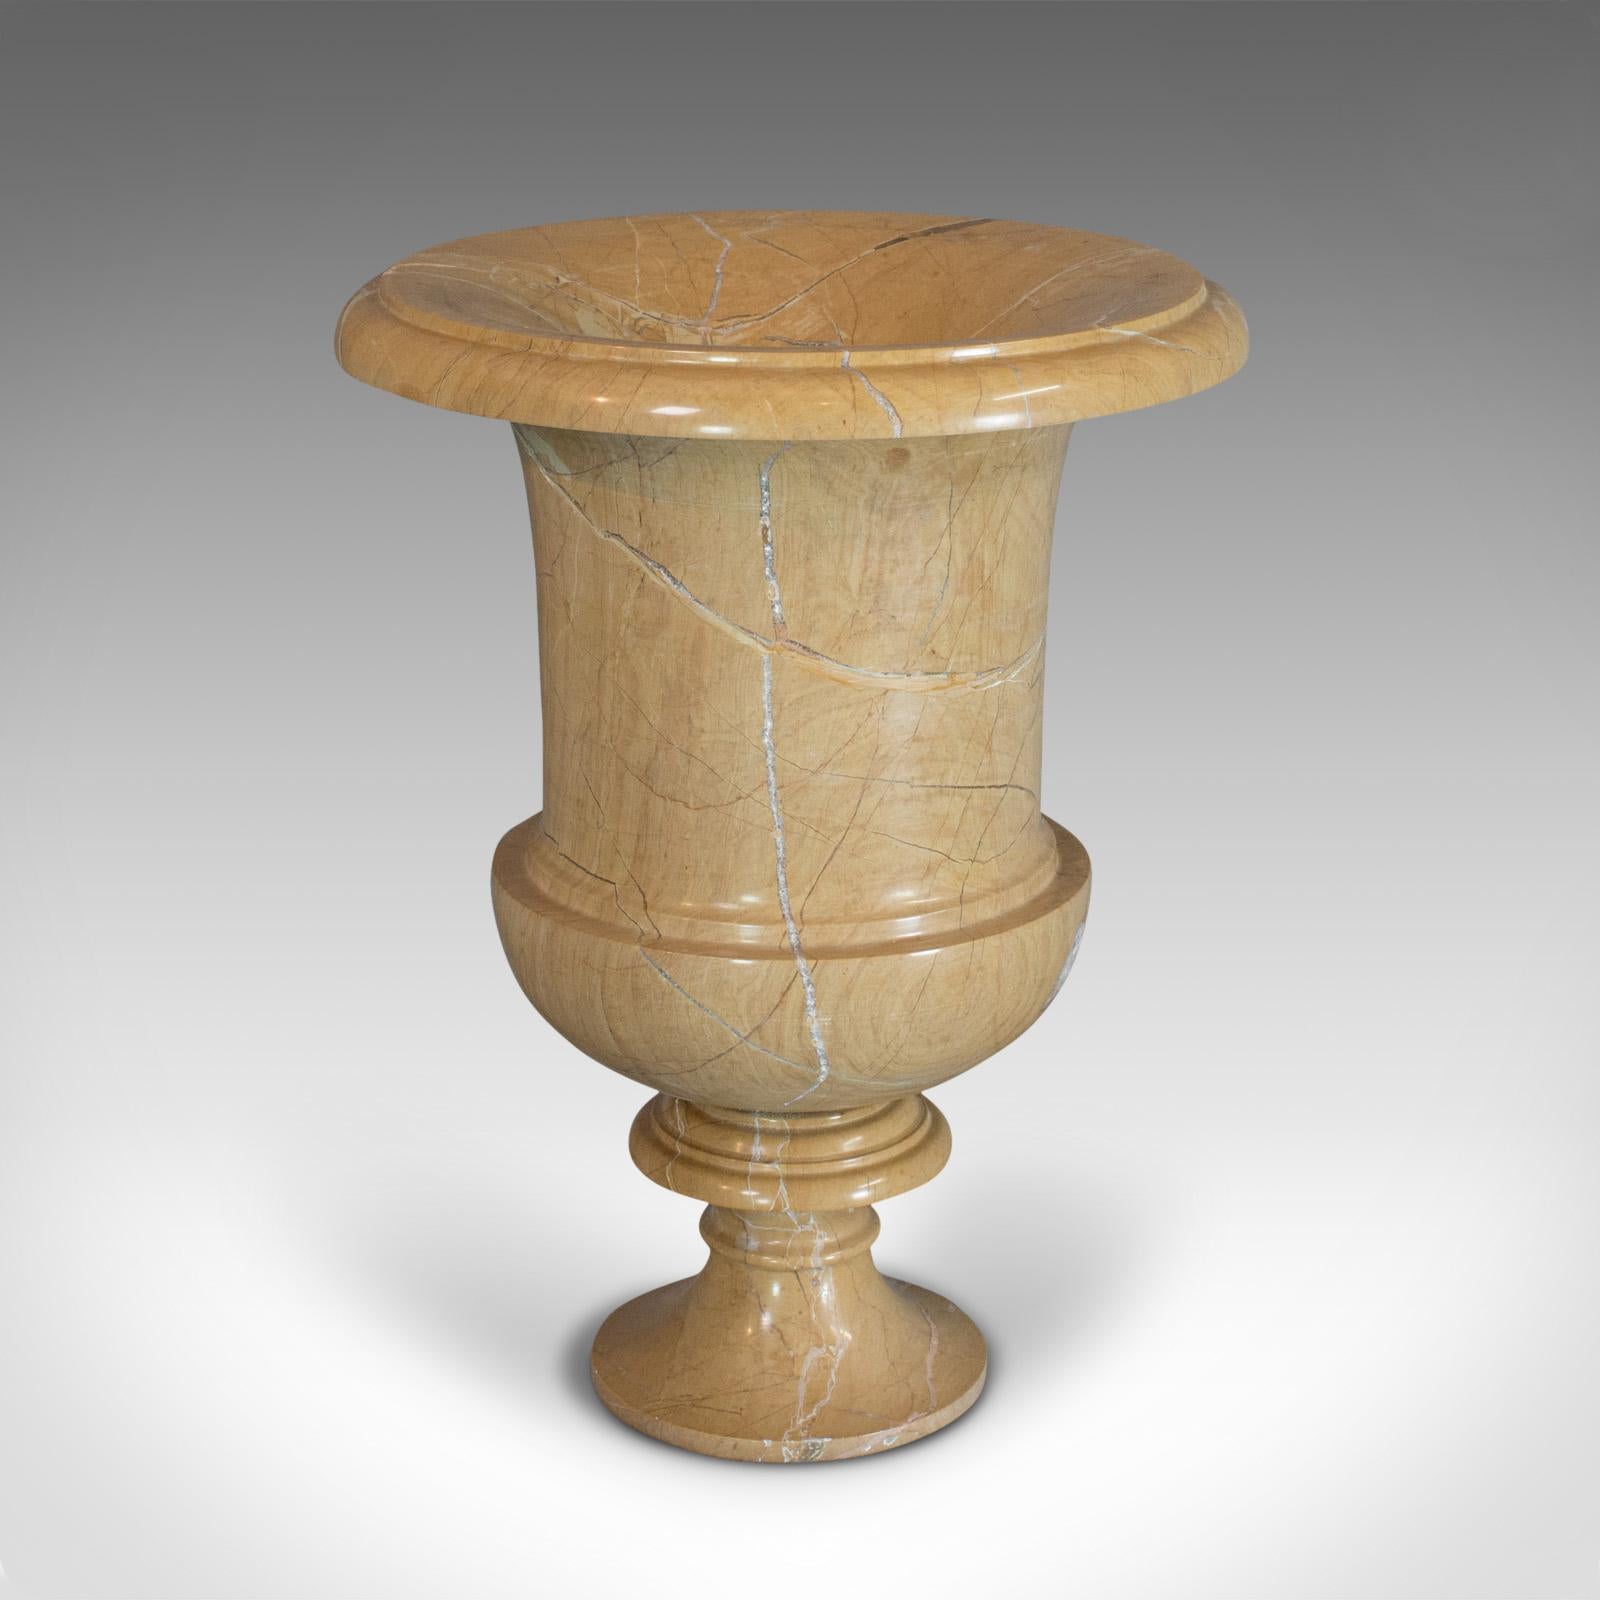 This is a vintage ornamental baluster urn. An English, golden pearl marble decorative vase, dating to the late 20th century.

Classical appeal with golden hues
Displays a desirable aged patina
Shapely baluster urn with marble interest

Mouth